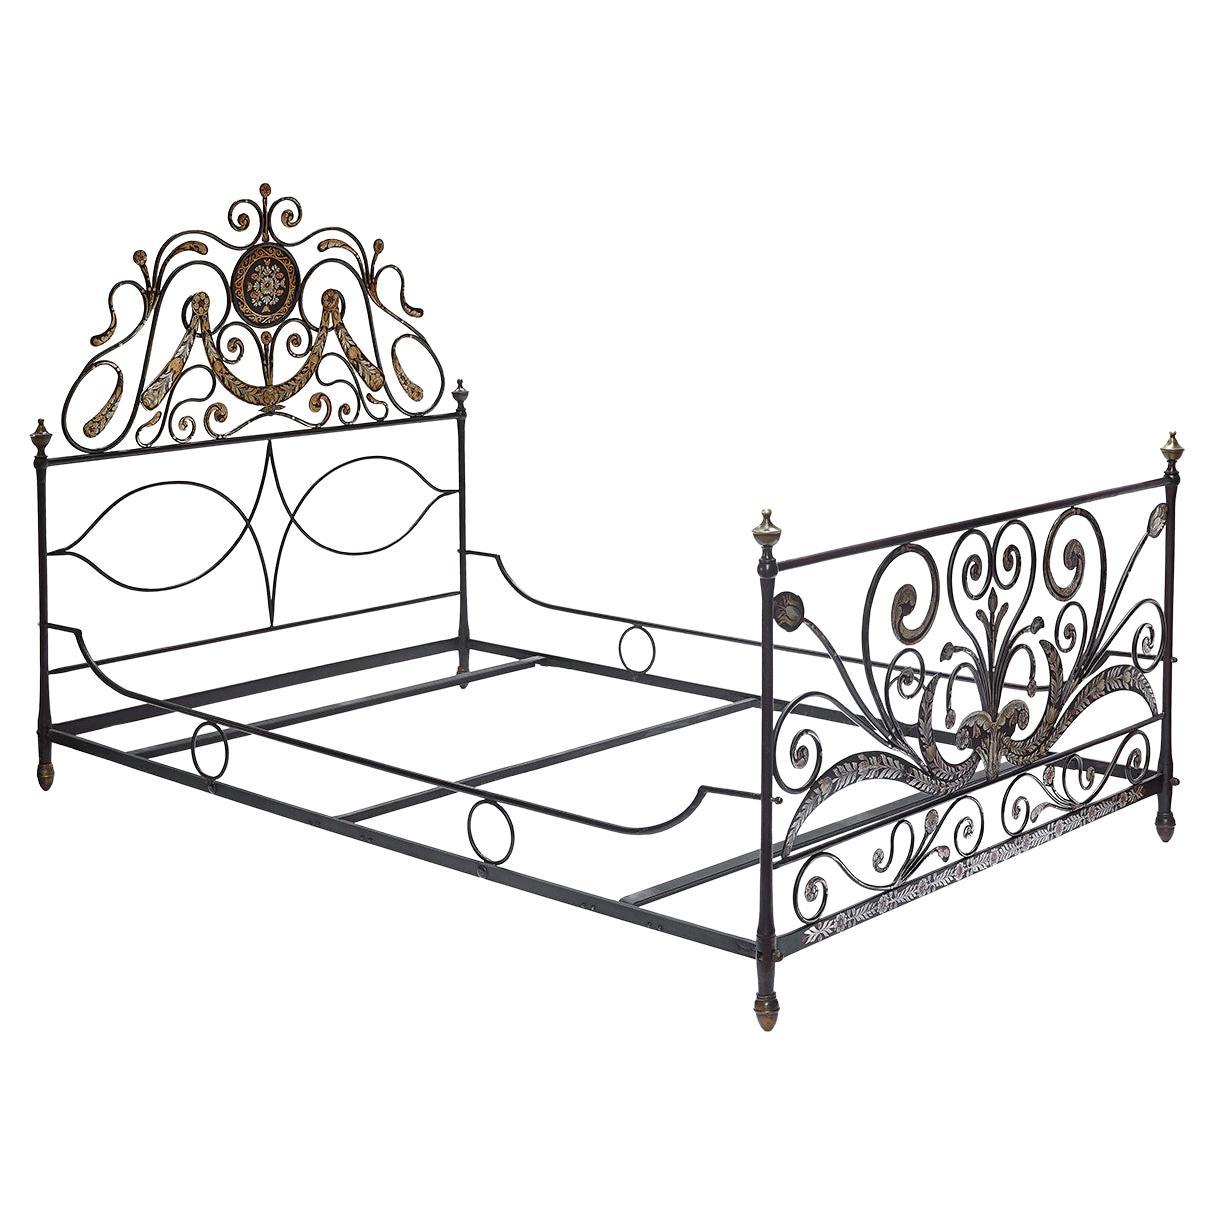 A stunning early 19th-century Italian Genoese full-size bedframe, an extremely rare meticulously hand-crafted bed from wrought iron and hand-painted with detailed golden, silver and red floral motifs.
This antique bed has been realized in Liguria,